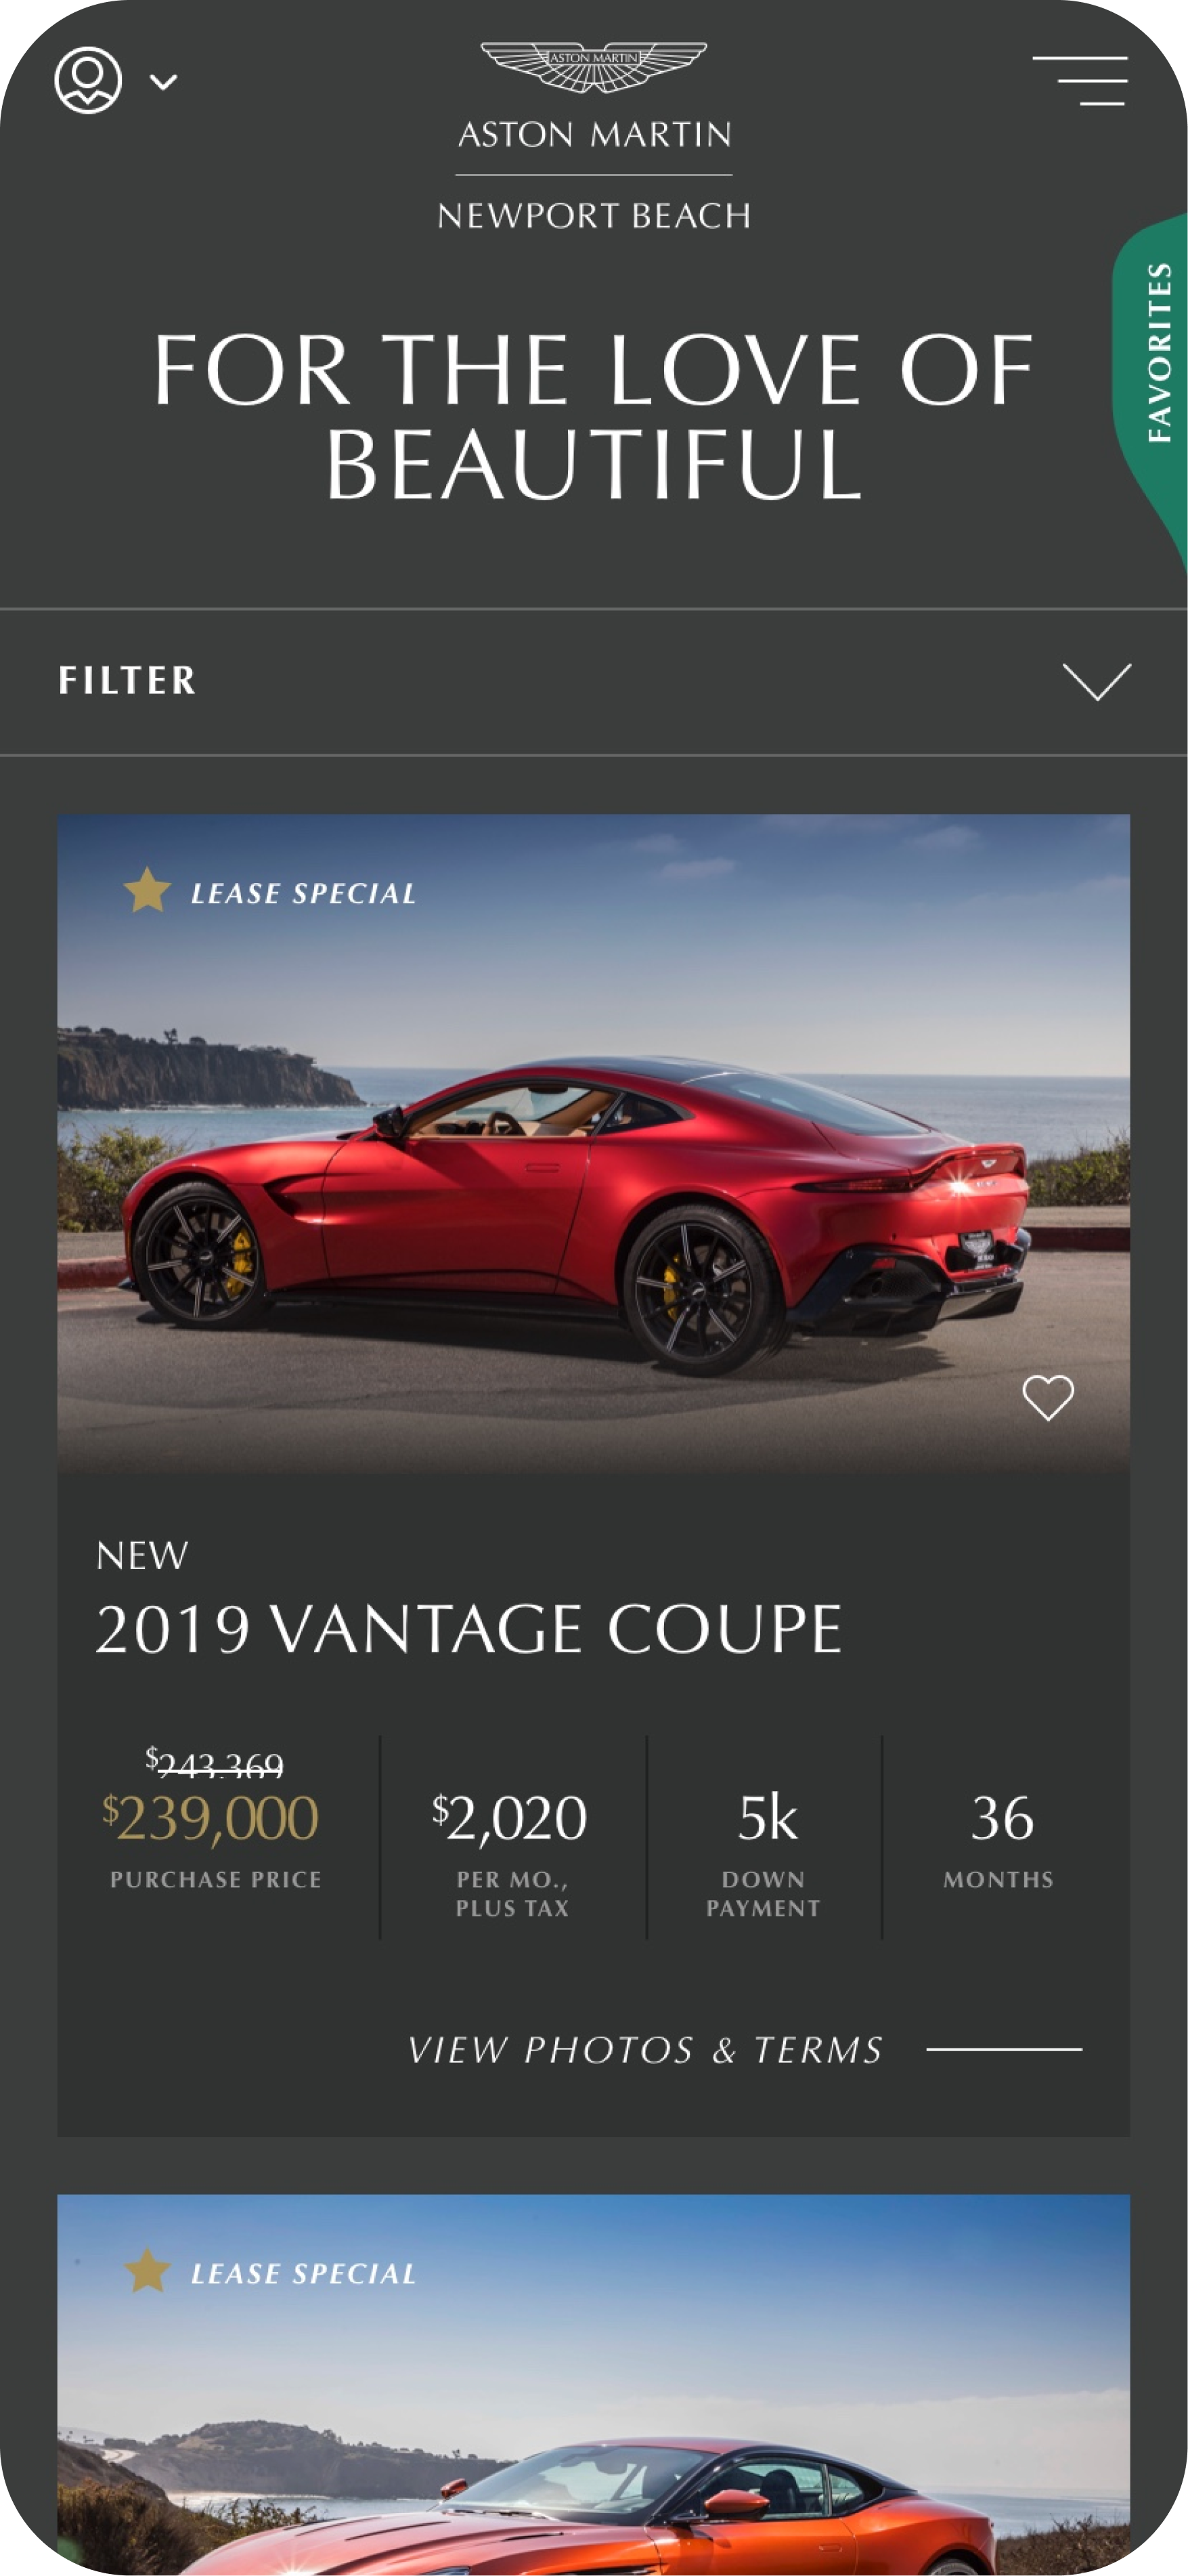 stream of available cars with the 2019 Vantage Coupe featured